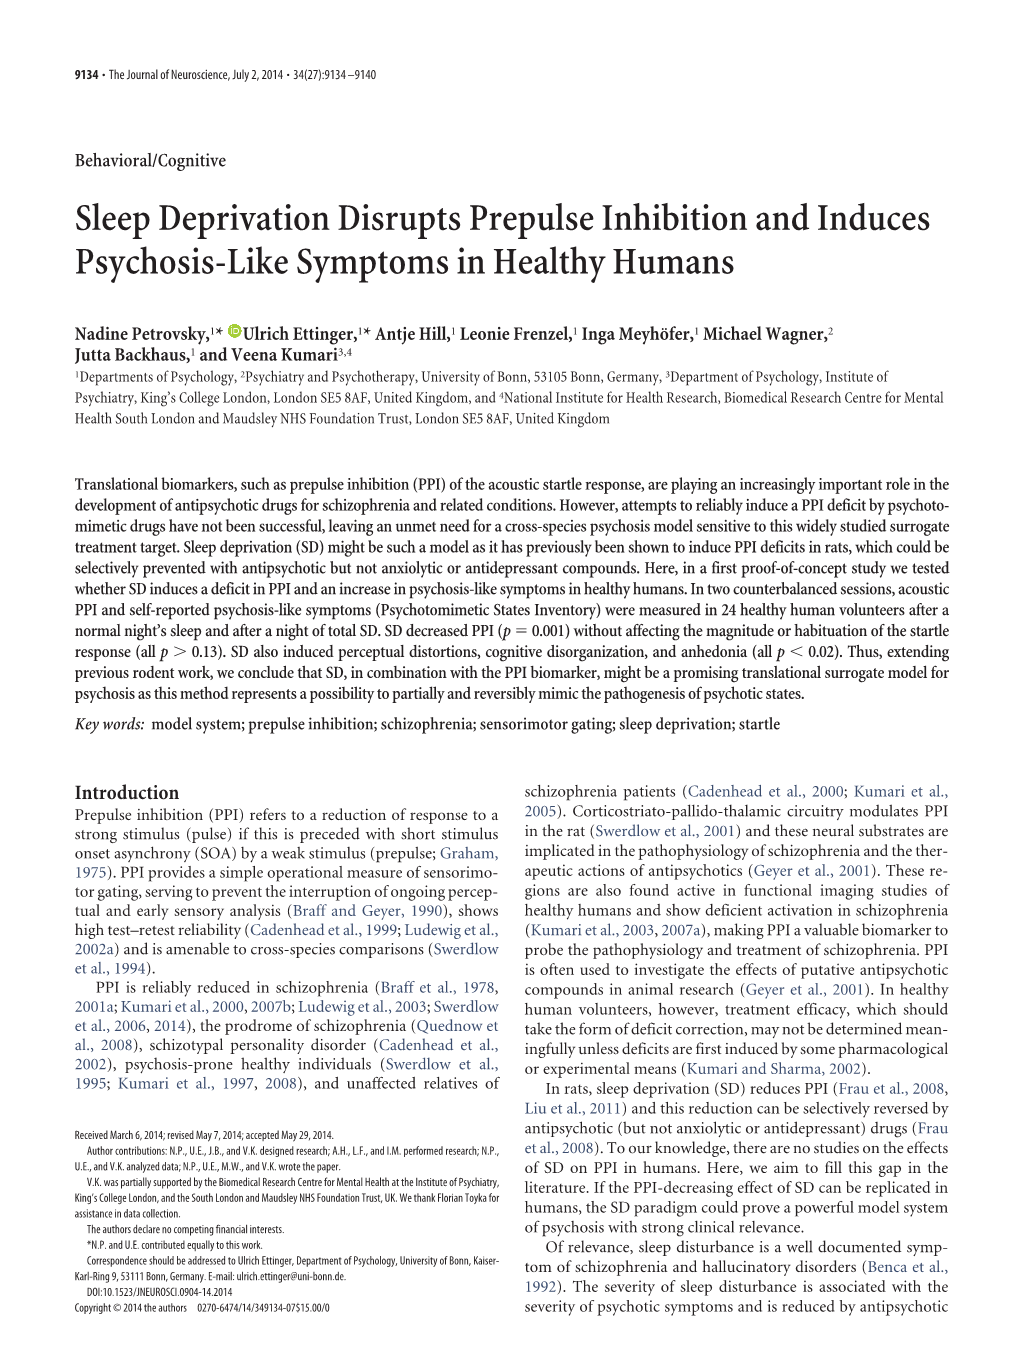 Sleep Deprivation Disrupts Prepulse Inhibition and Induces Psychosis-Like Symptoms in Healthy Humans